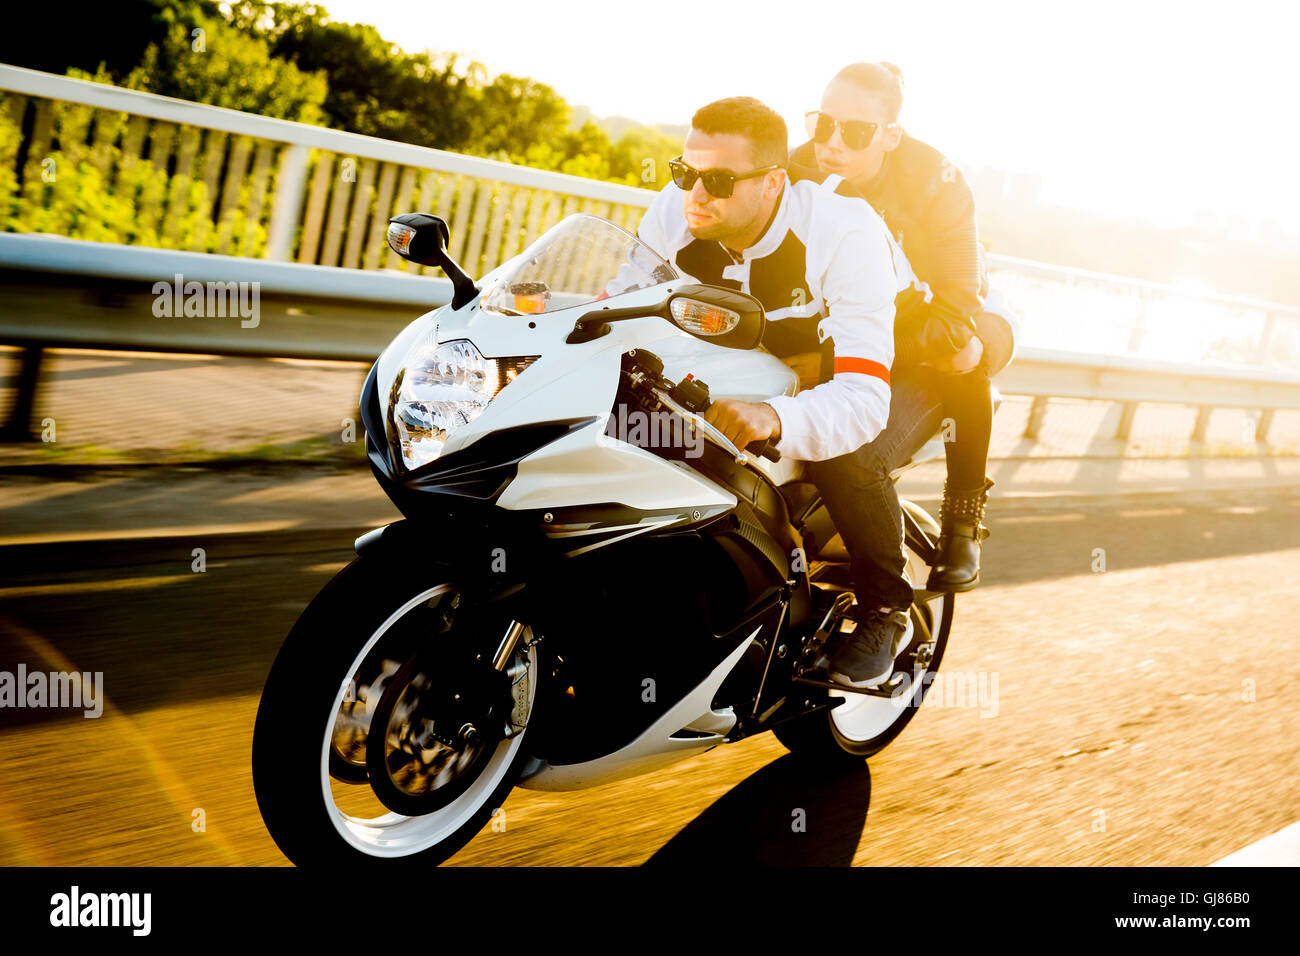 Man and woman wearing  leather jackets and stylish sunglasses riding on motorcycle Stock Photo